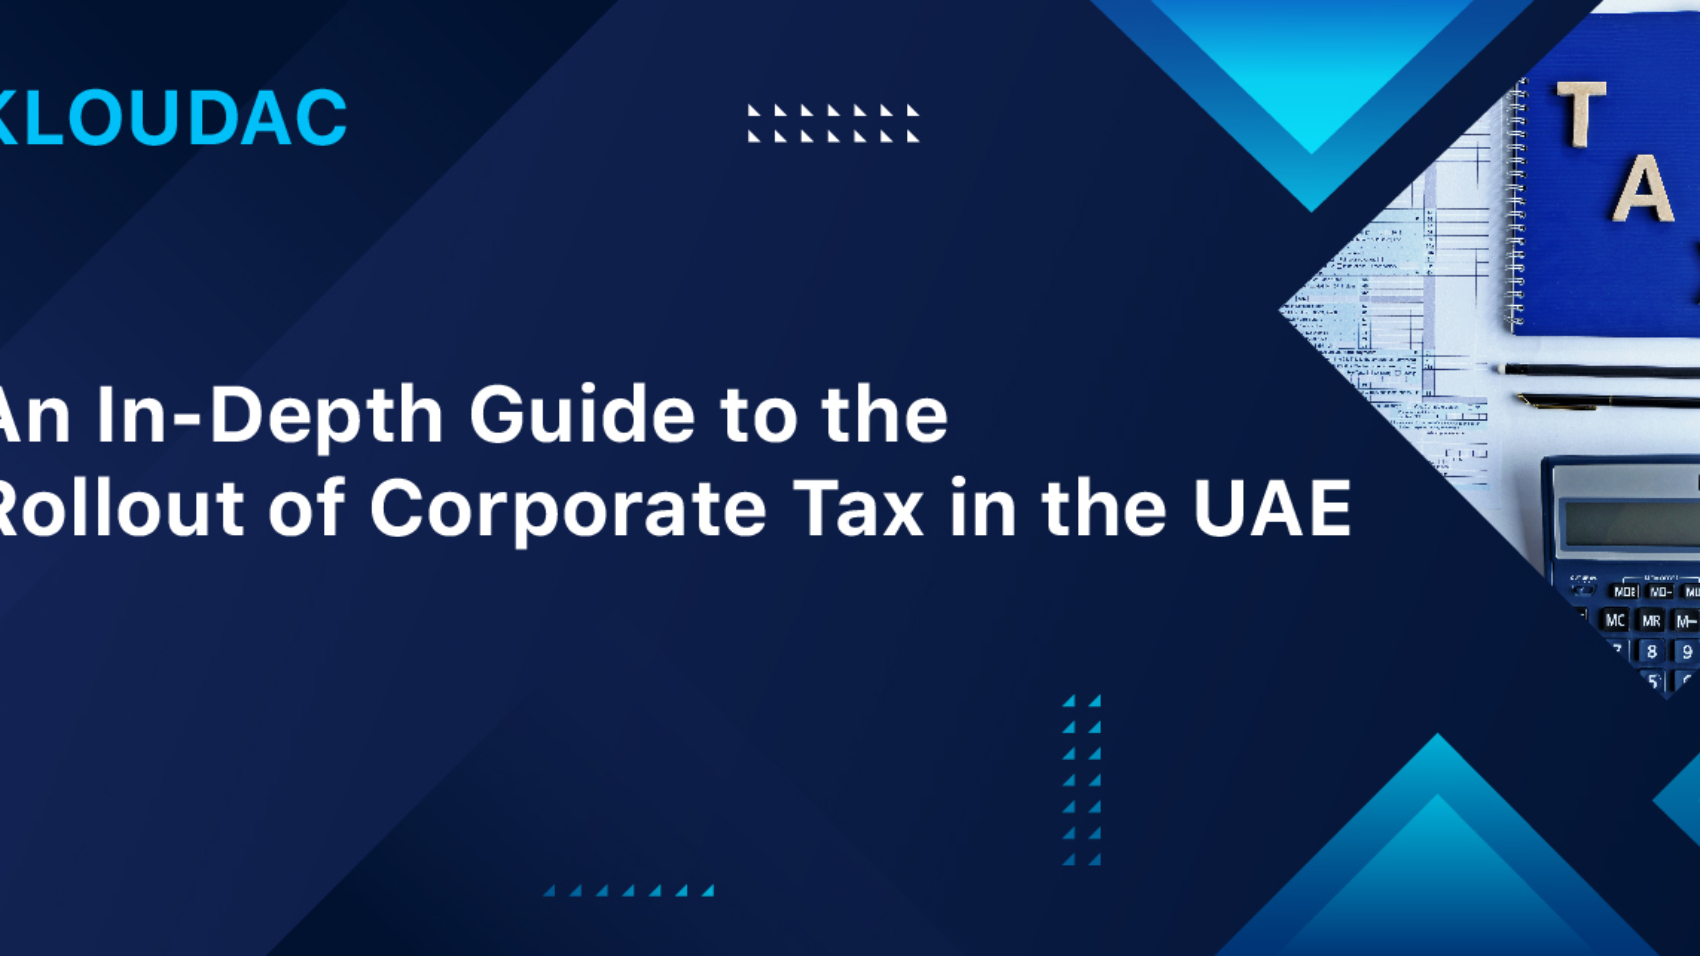 An In-Depth Guide to the Rollout of Corporate Tax in the UAE 2023